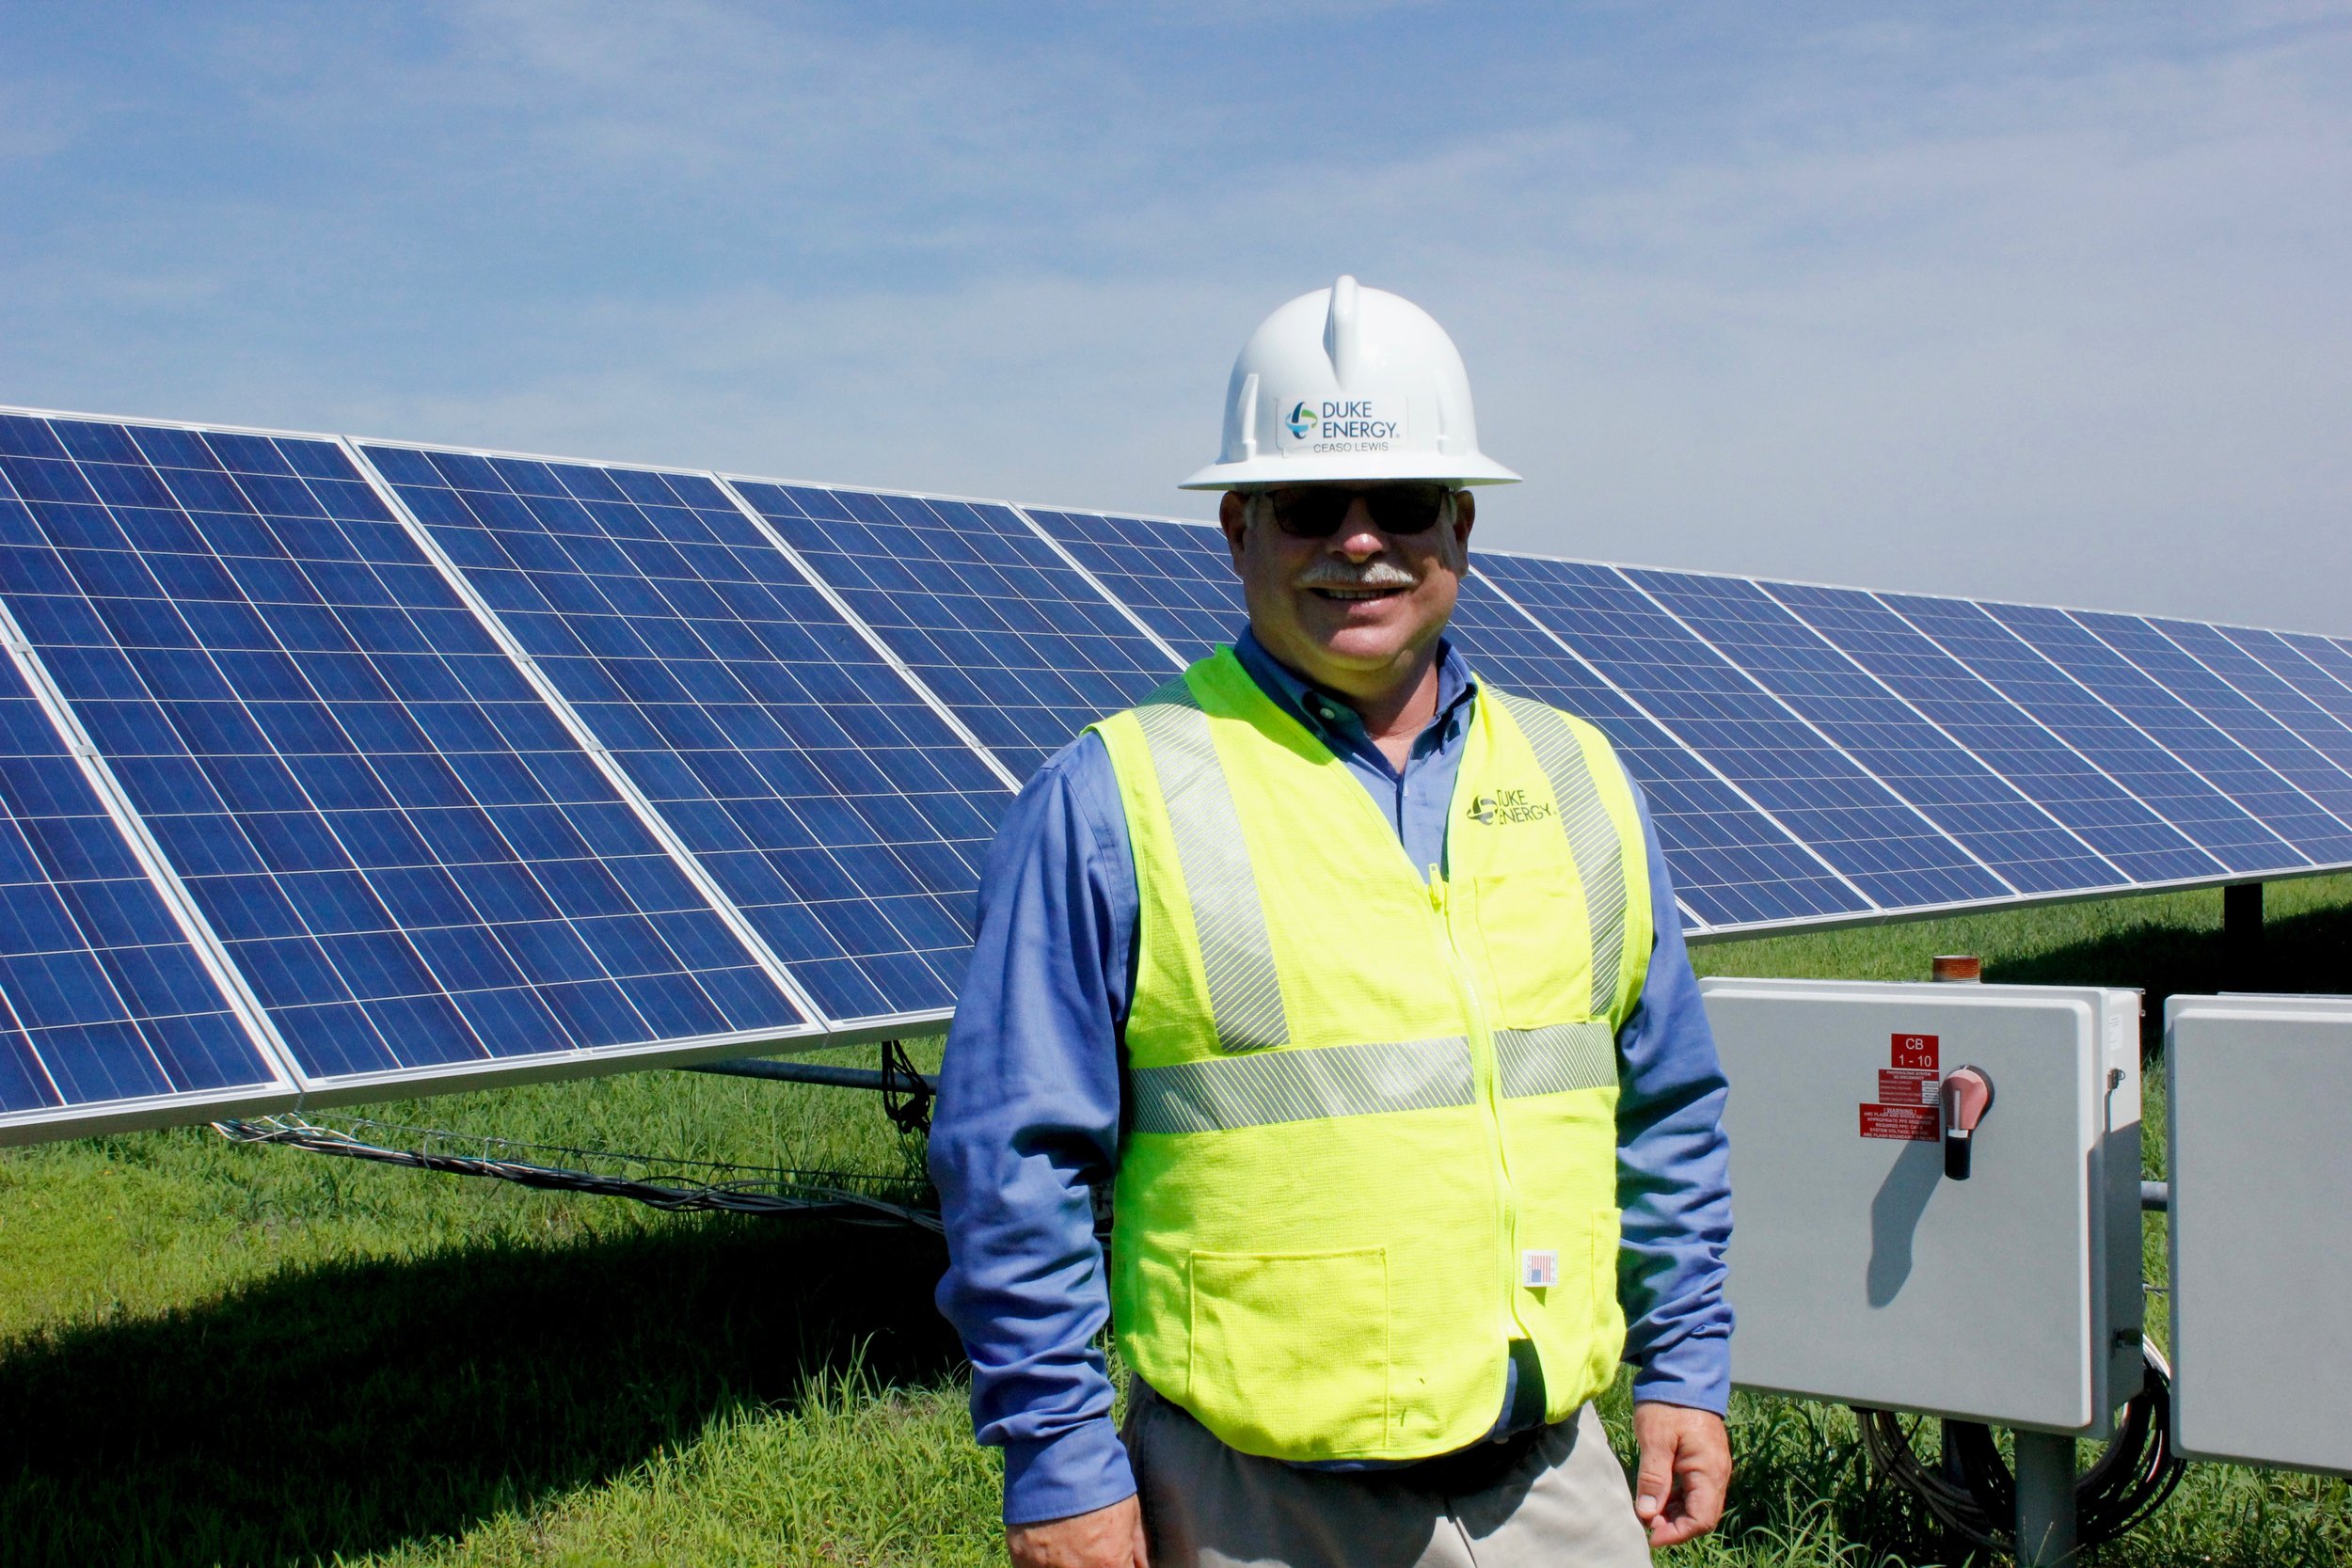  Ceaso  Manager, Solar Operations  Tarboro, NC  Navy    